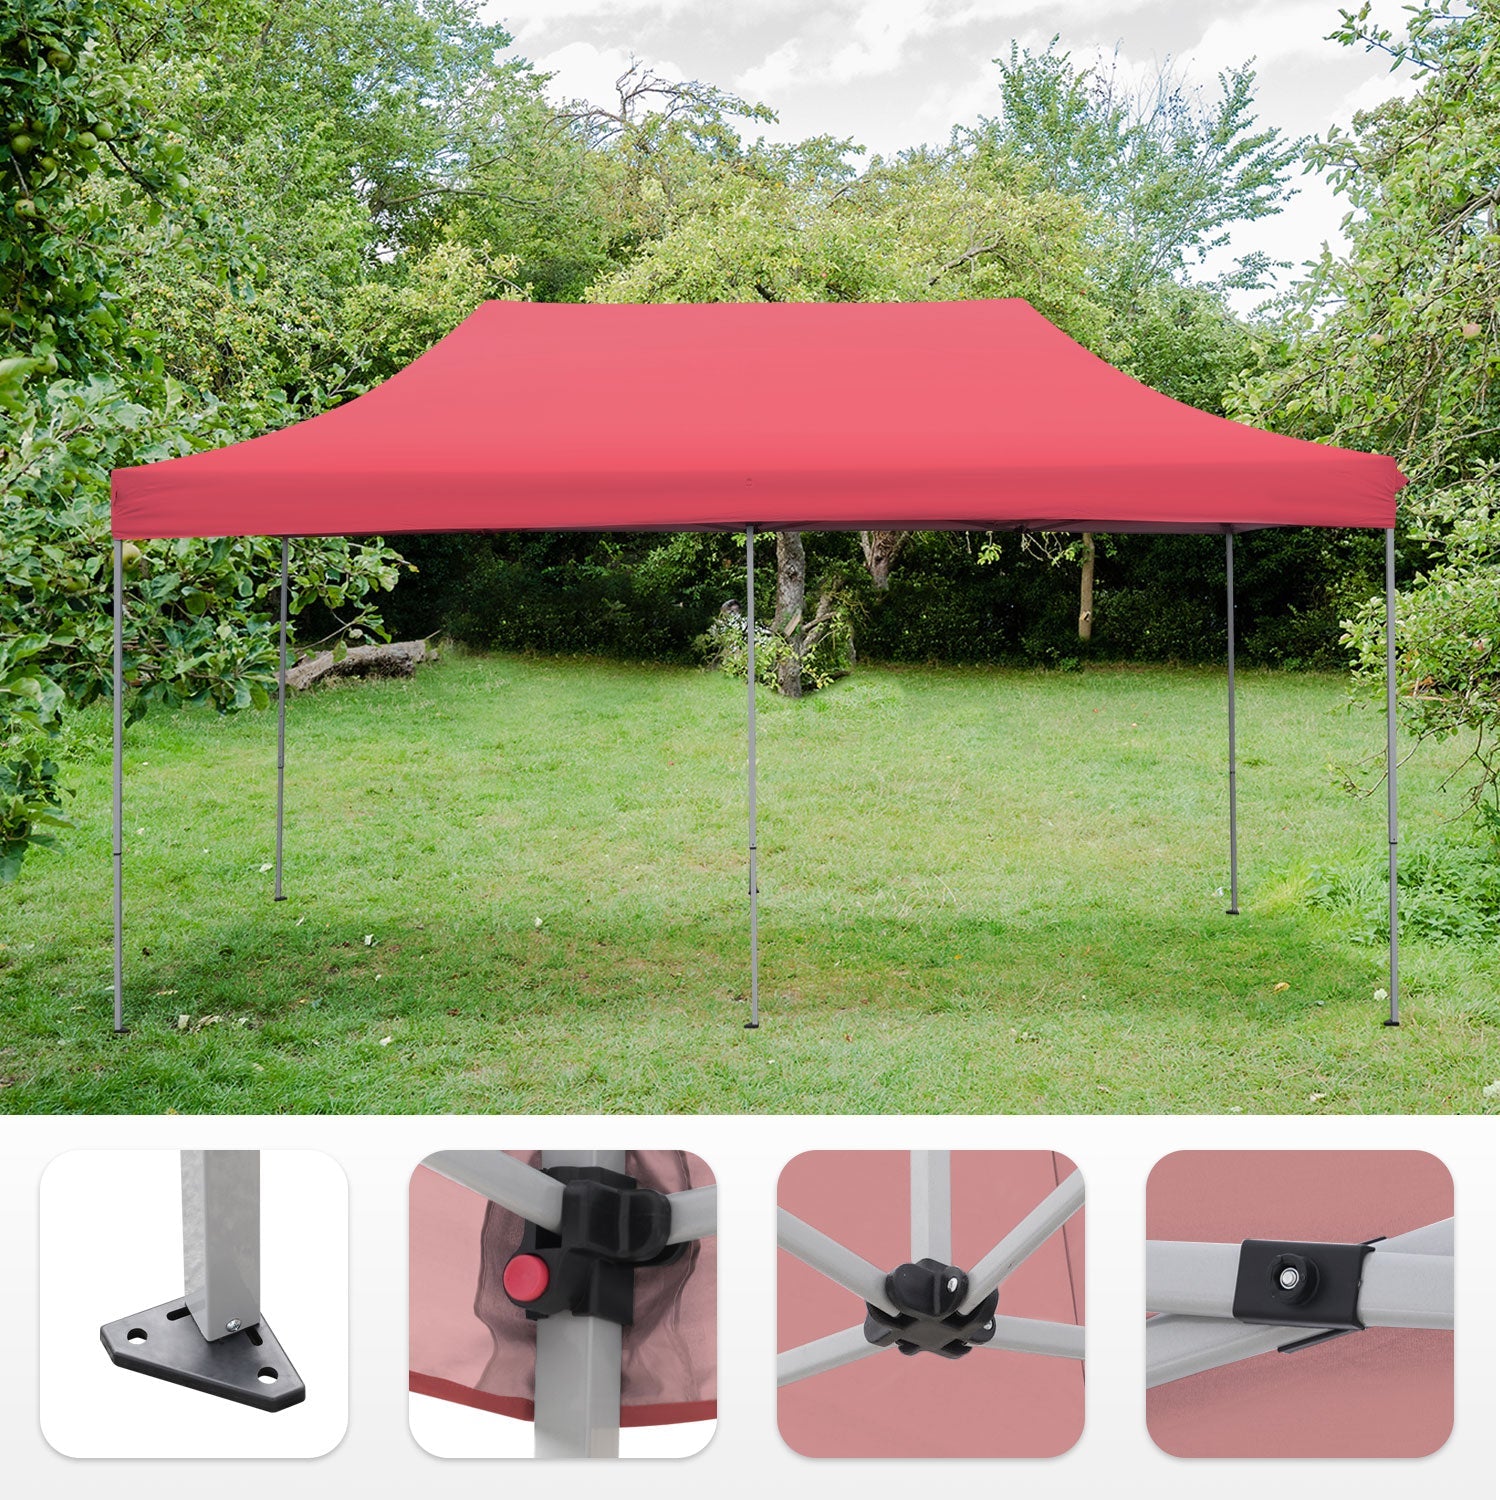 Ainfox 10x20 ft Outdoor Canopy Tent, Pop up Canopy Tent Portable Shade Instant Folding Canopy with Wheeled Carrying Bag and Height Adjustable(Red)